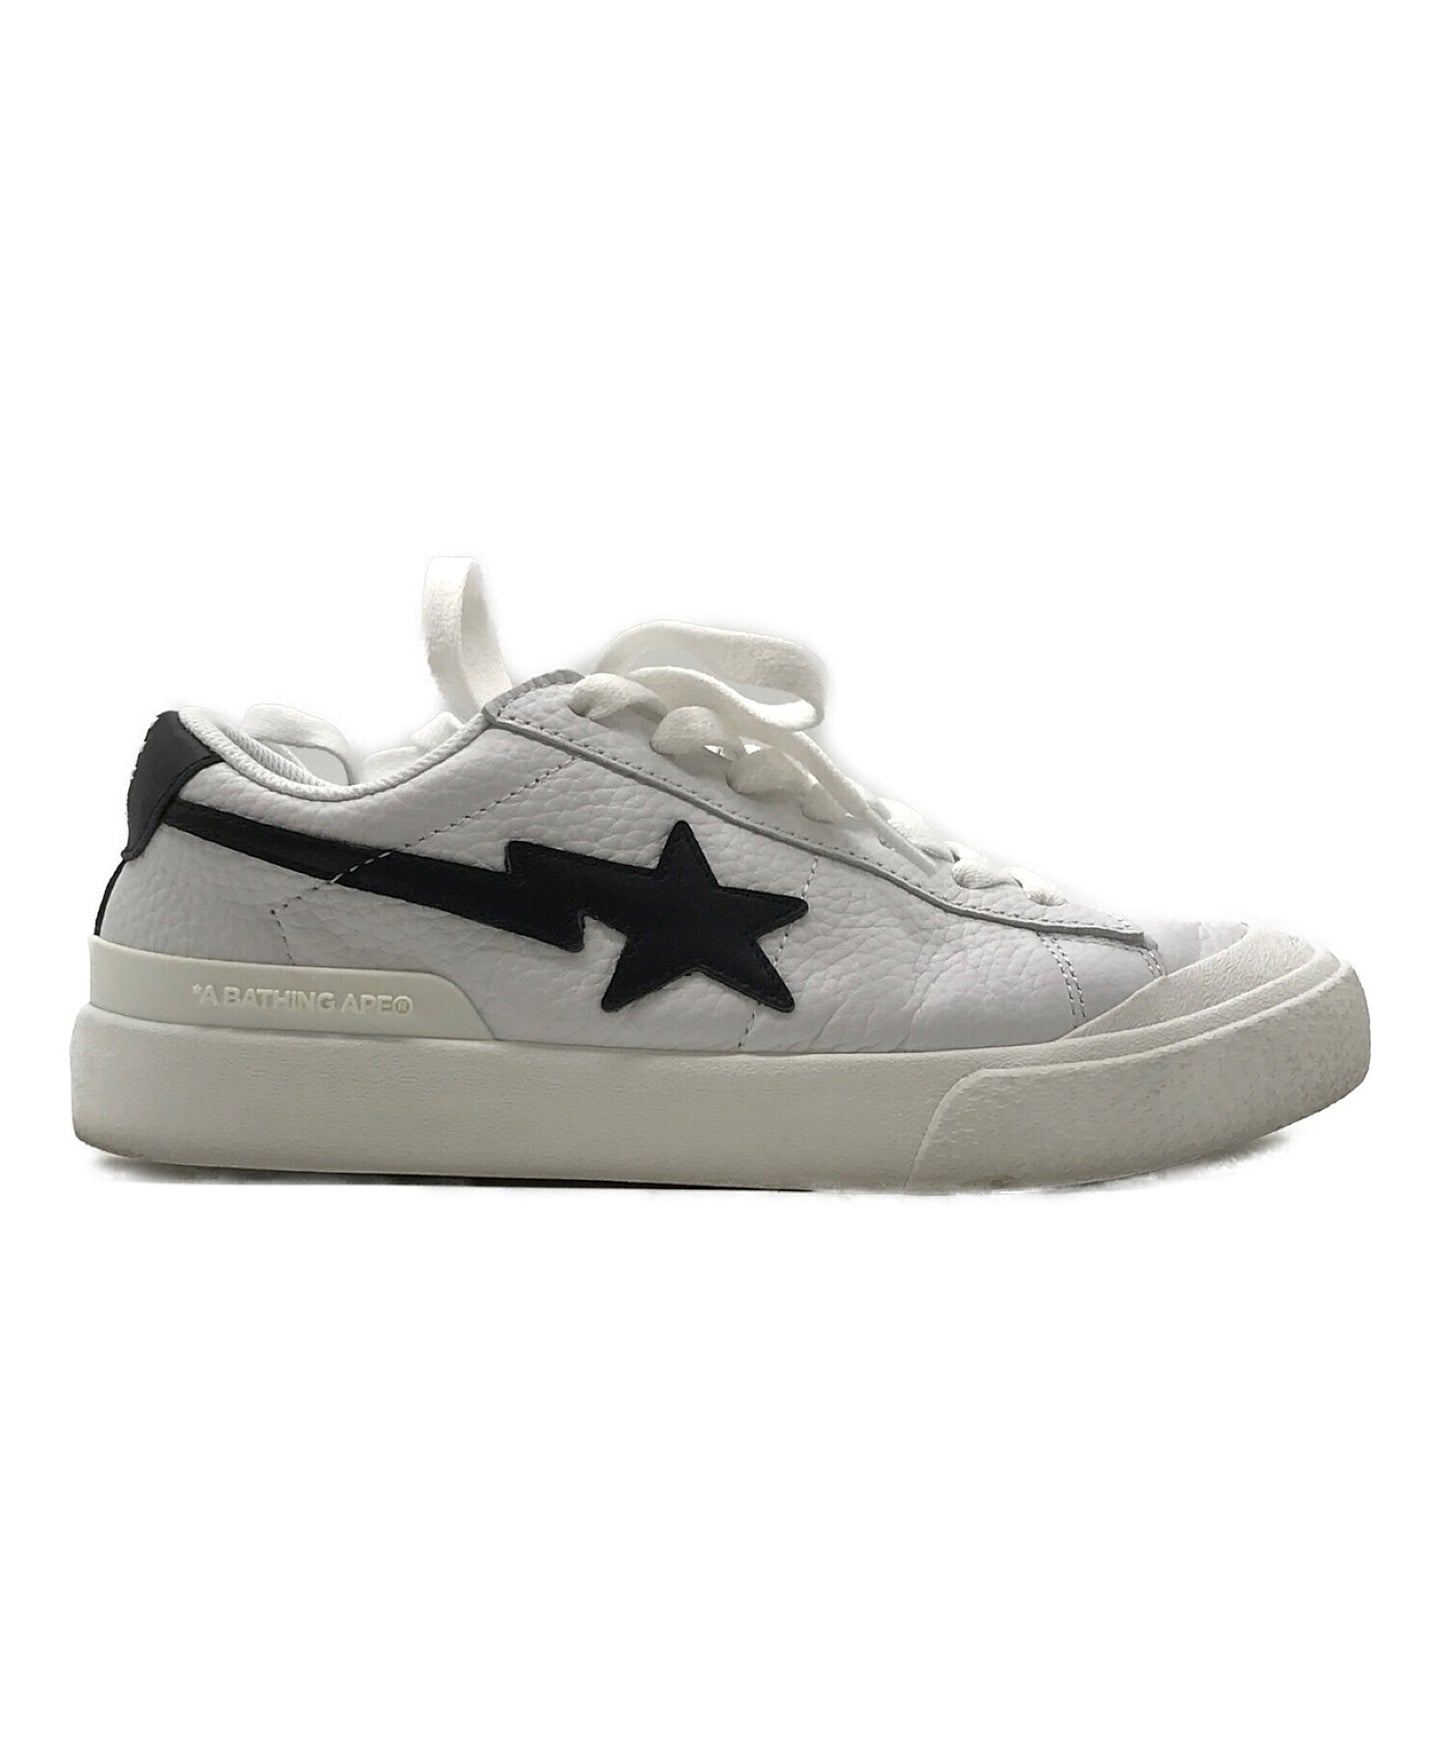 [Pre-owned] A BATHING APE MAD STA low cut sneakers